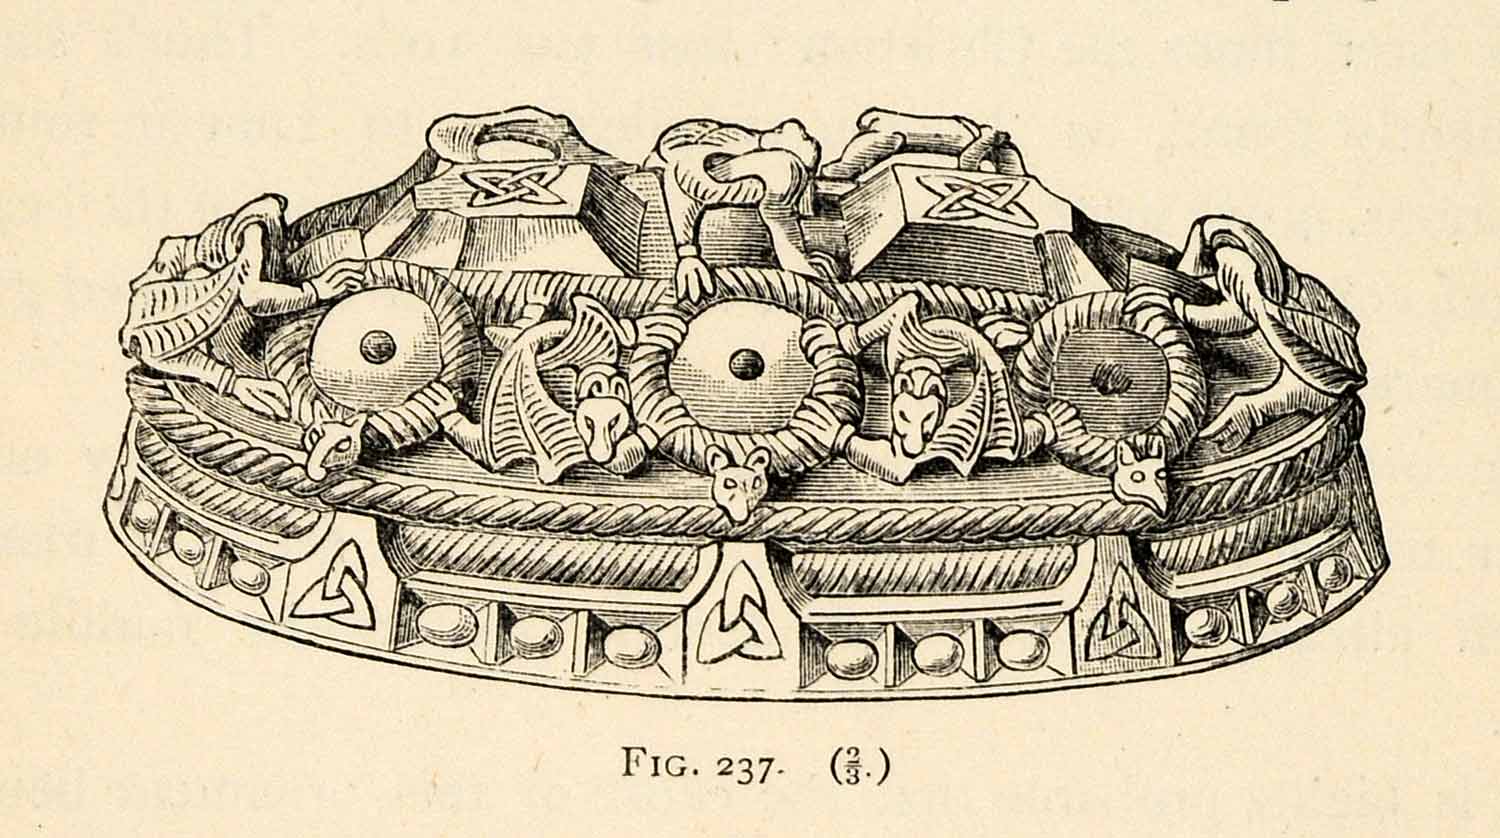 1882 Woodcut Brooch Patterns Figures Men Animals Jewelry Archaeological XGS8